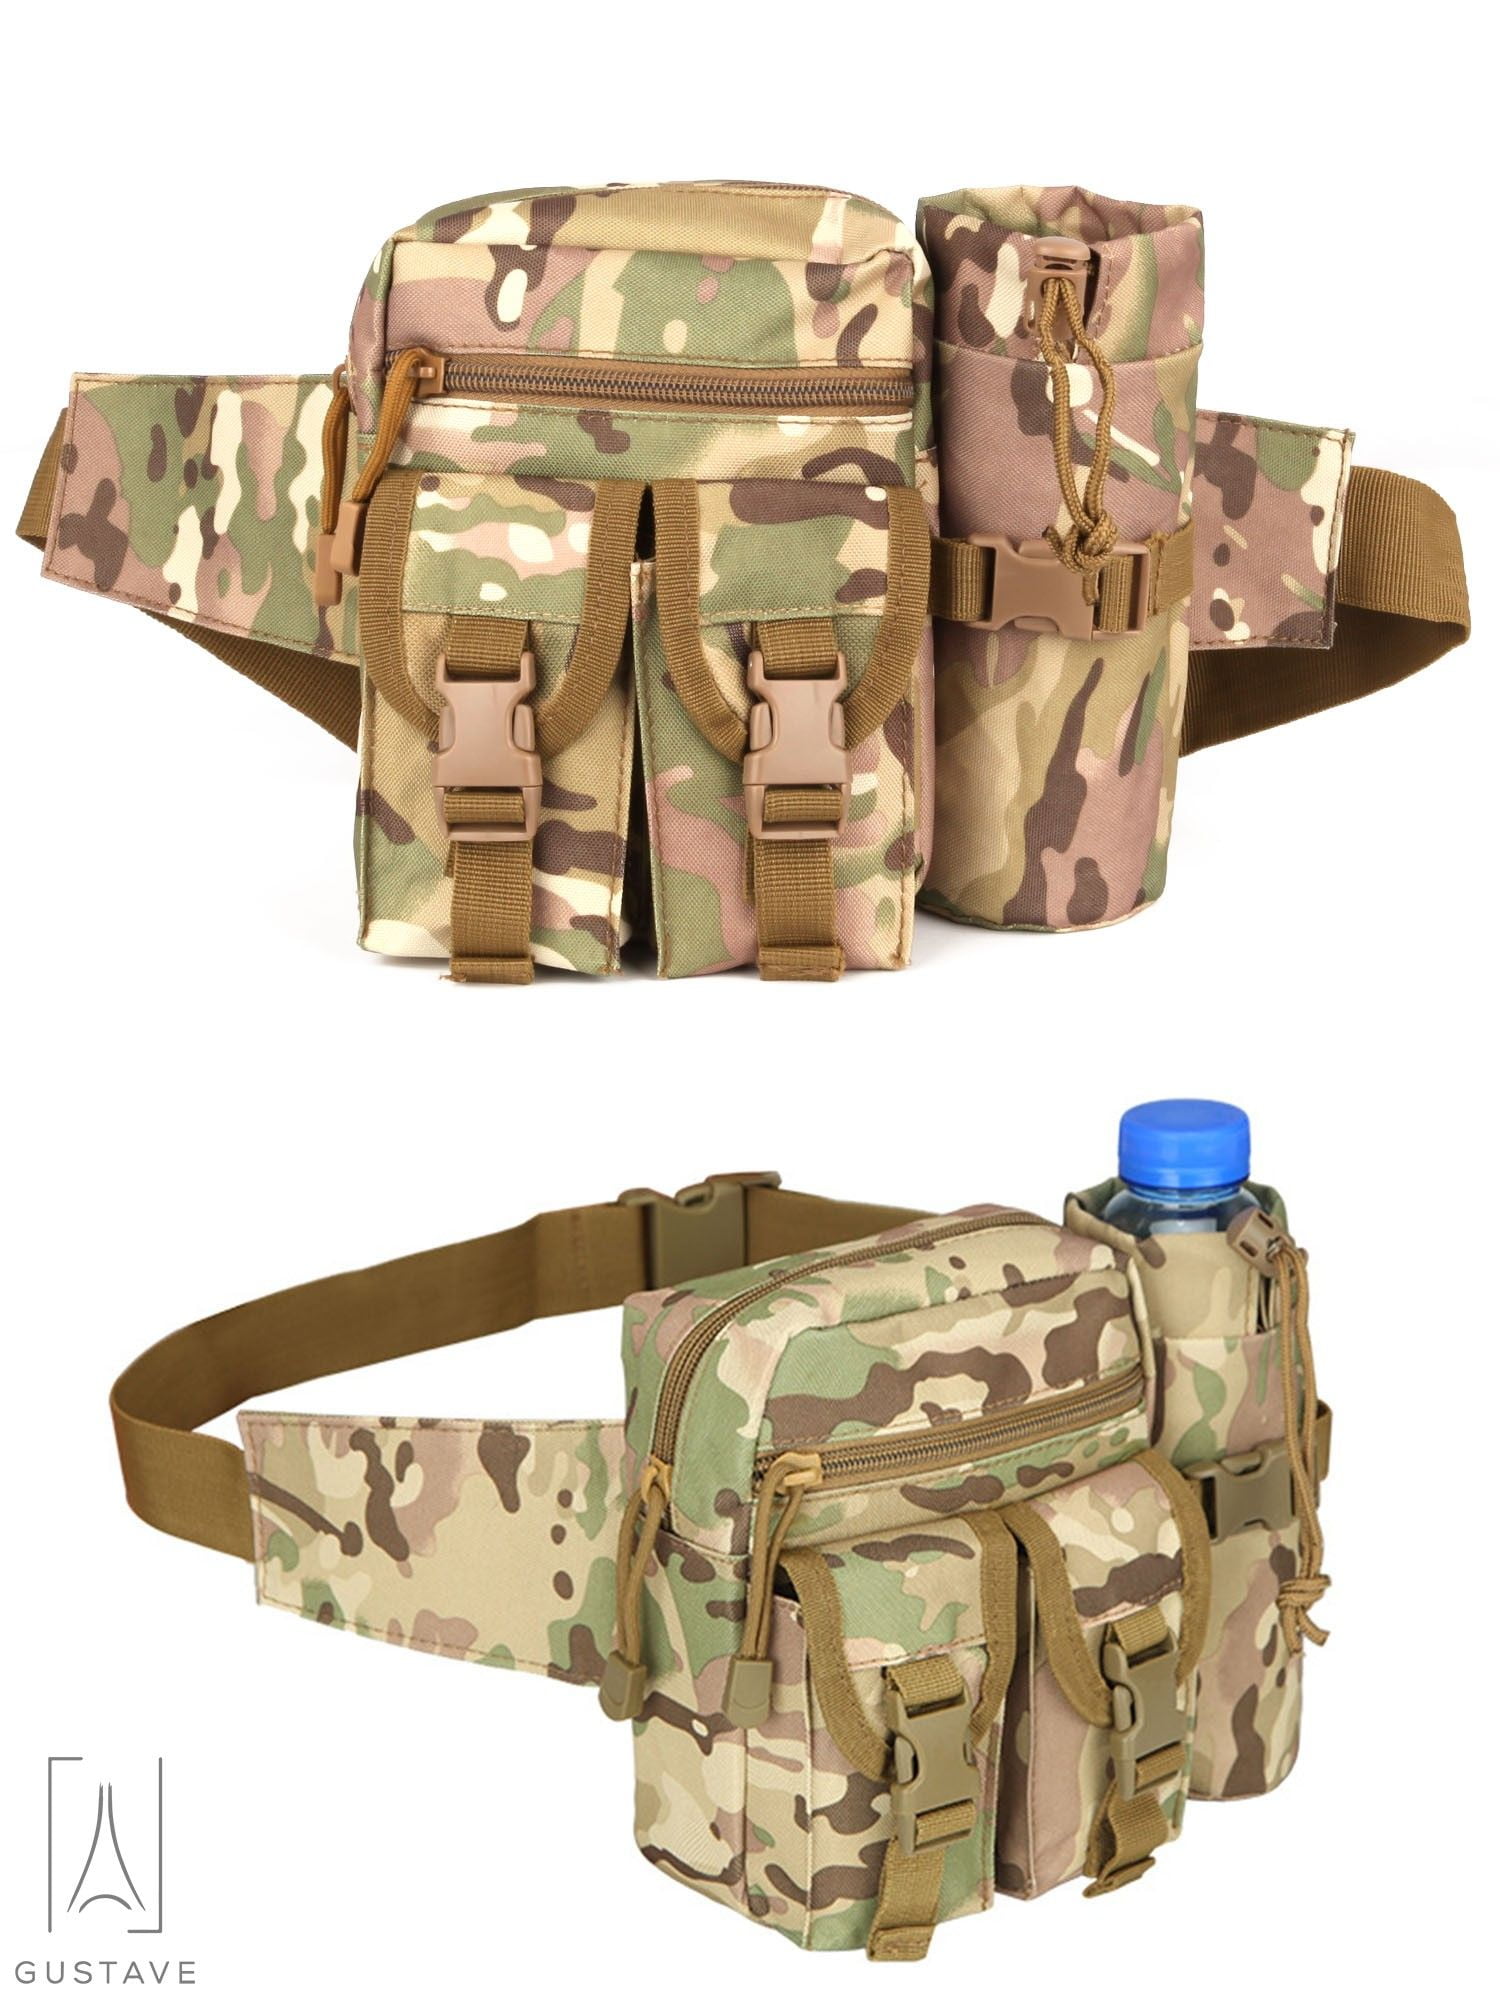 vulgaritet Logisk et eller andet sted Gustave Tactical Waist Bag, Military Fanny Pack Waterproof Utility Belt  with Water Bottle Holder Suitable for Fishing, Mountaineering, Camping,  Hunting Running Outdoor Belt Bag "Camouflage CP" - Walmart.com